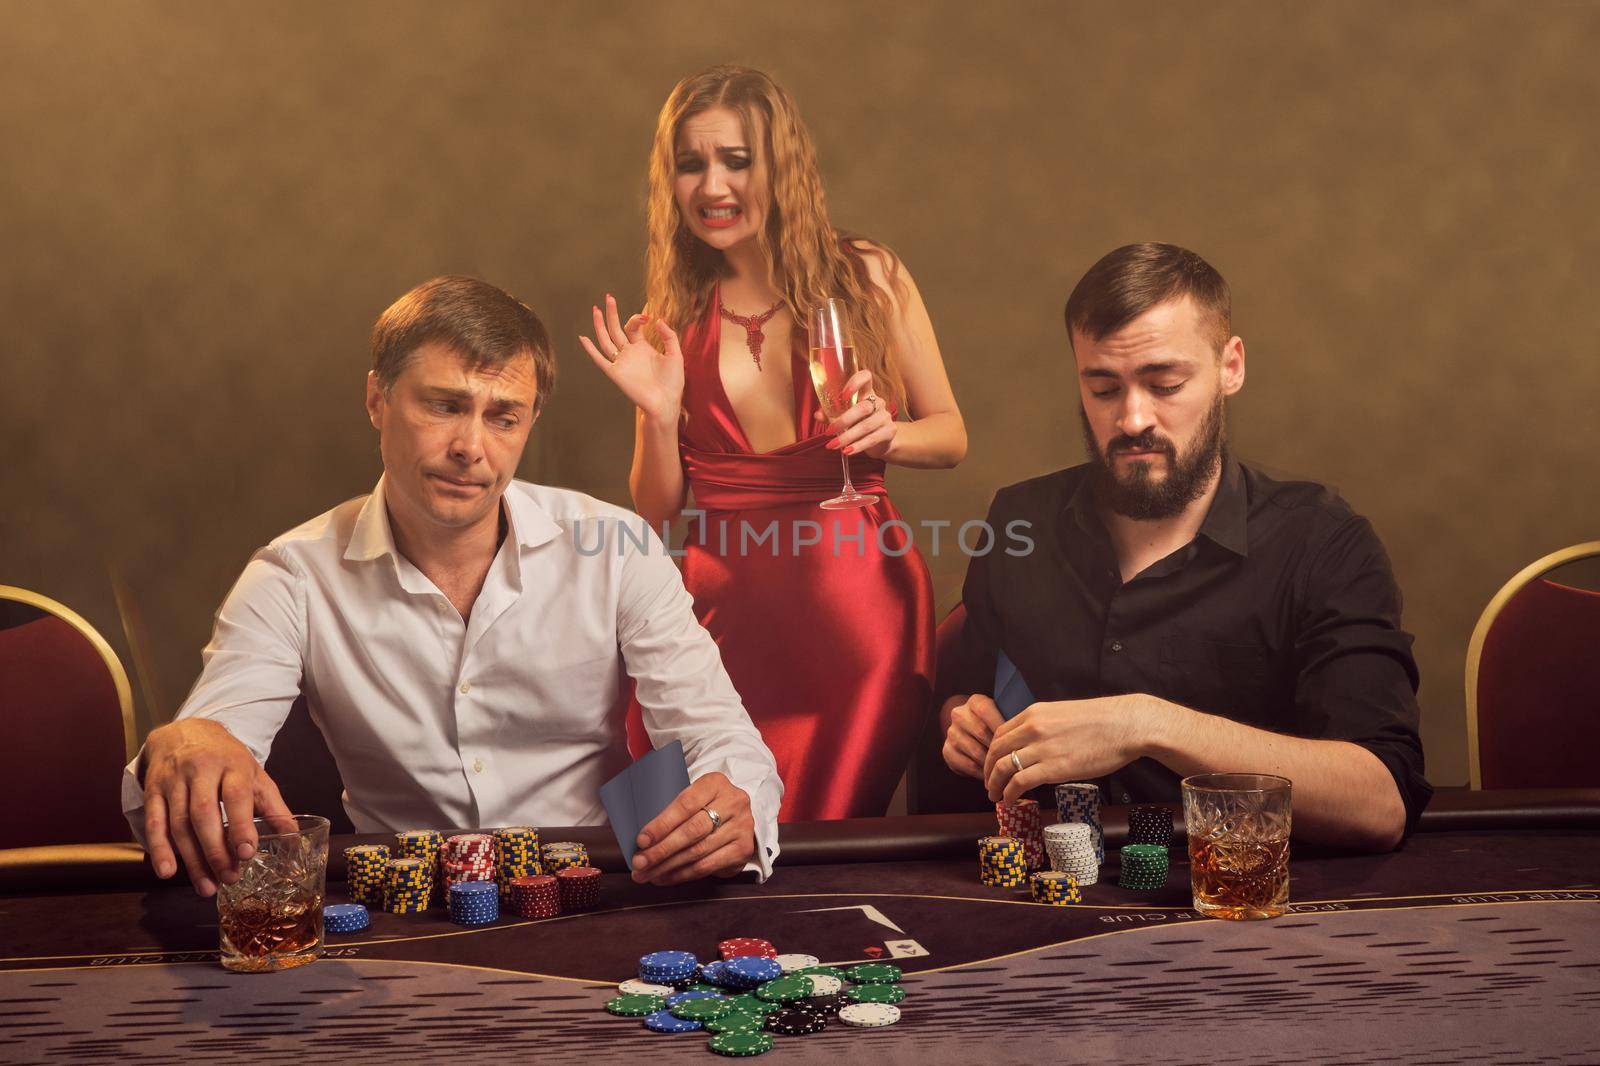 Two old friends and attractive female are playing poker at casino. They are making bets waiting for a big win and looking a little bit disappointed while posing at the table against a yellow backlight on smoke background. Cards, chips, money, gambling, entertainment concept.